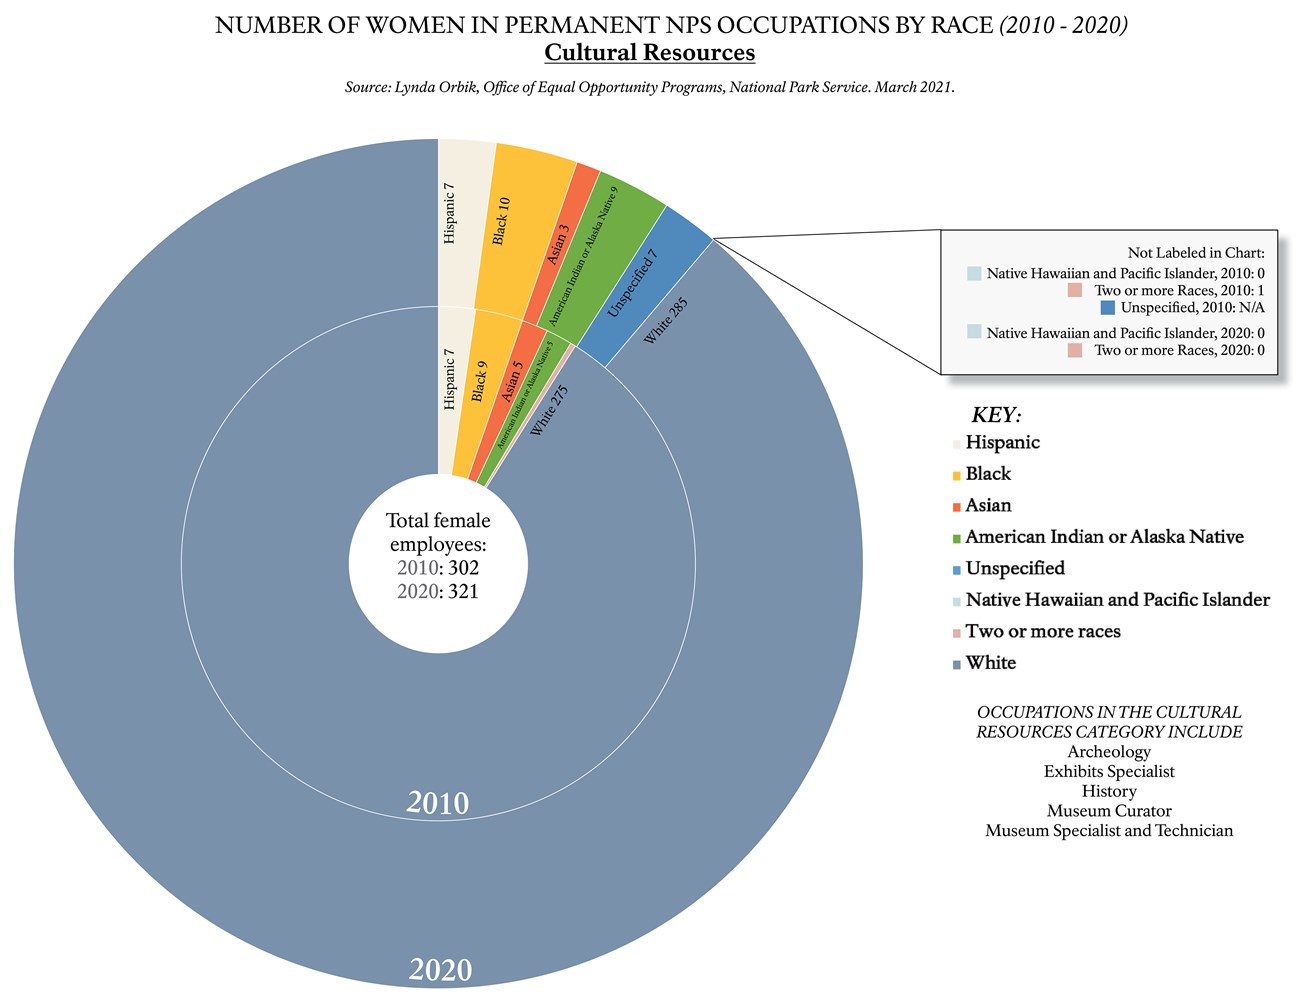 Pie chart representing women with permanent positions in cultural resources by race (2010-2020).